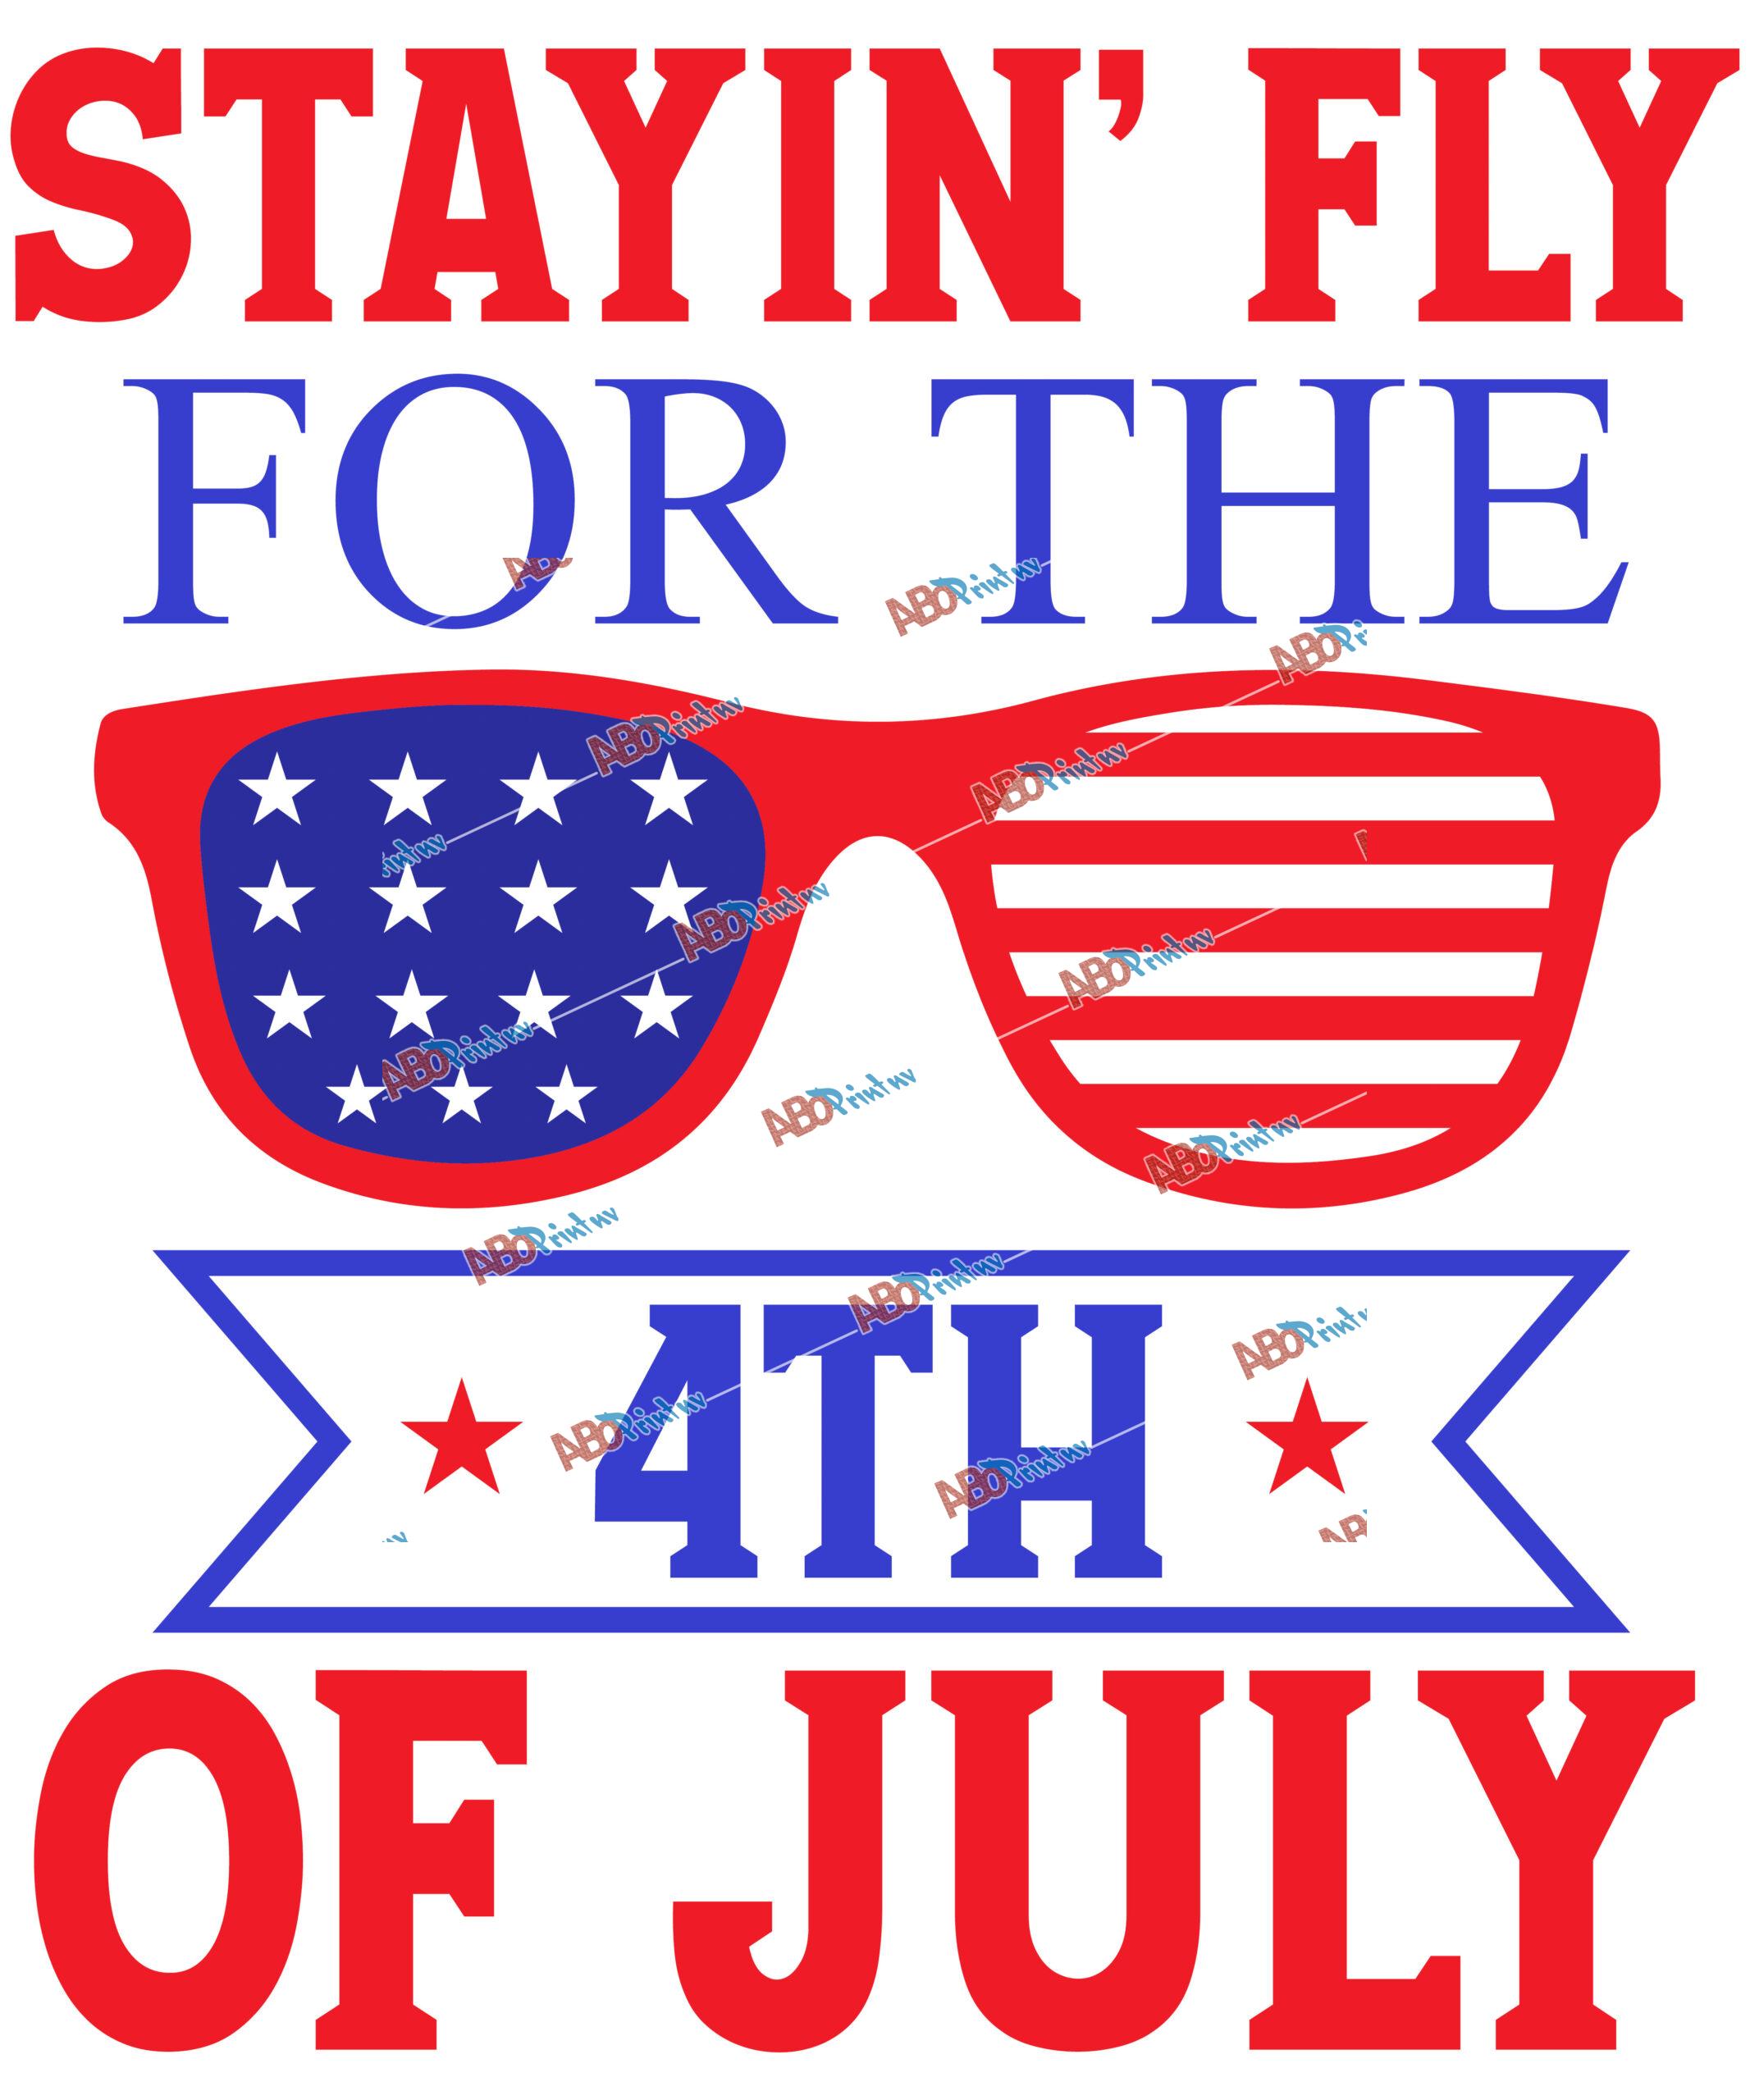 Stayin' Fly for the 4th of July.jpg